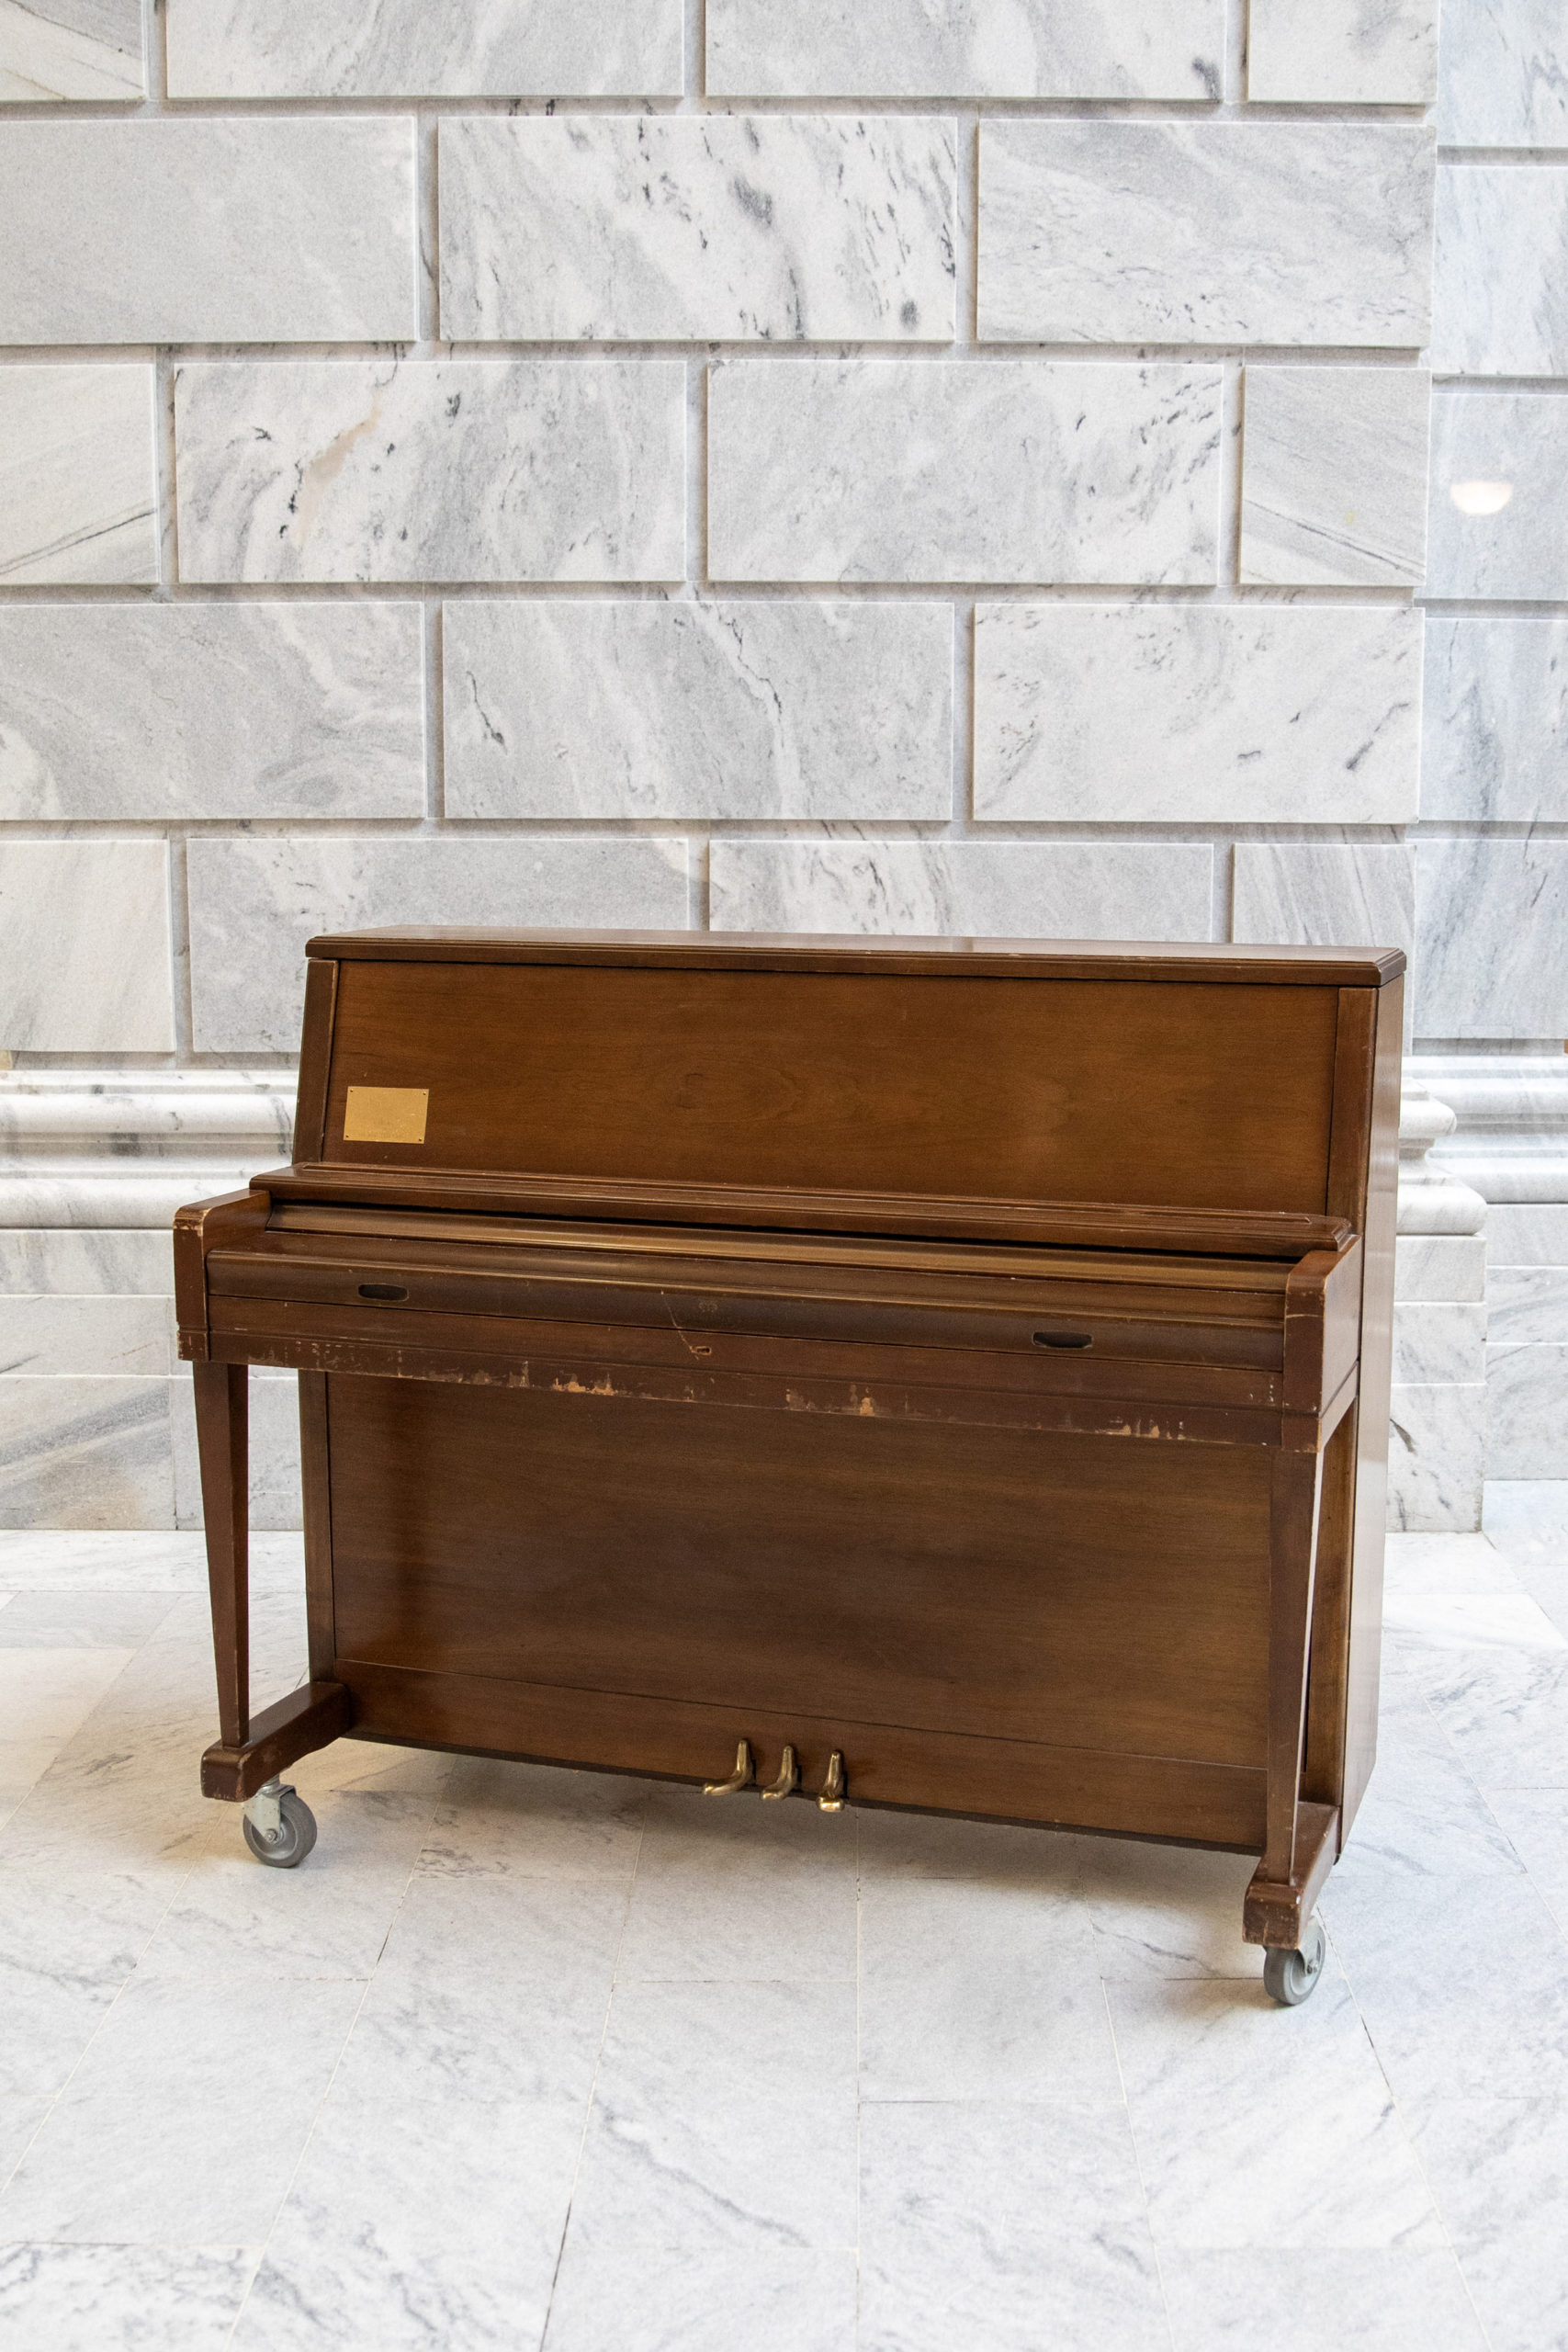 Upright wood piano on marble backdrop